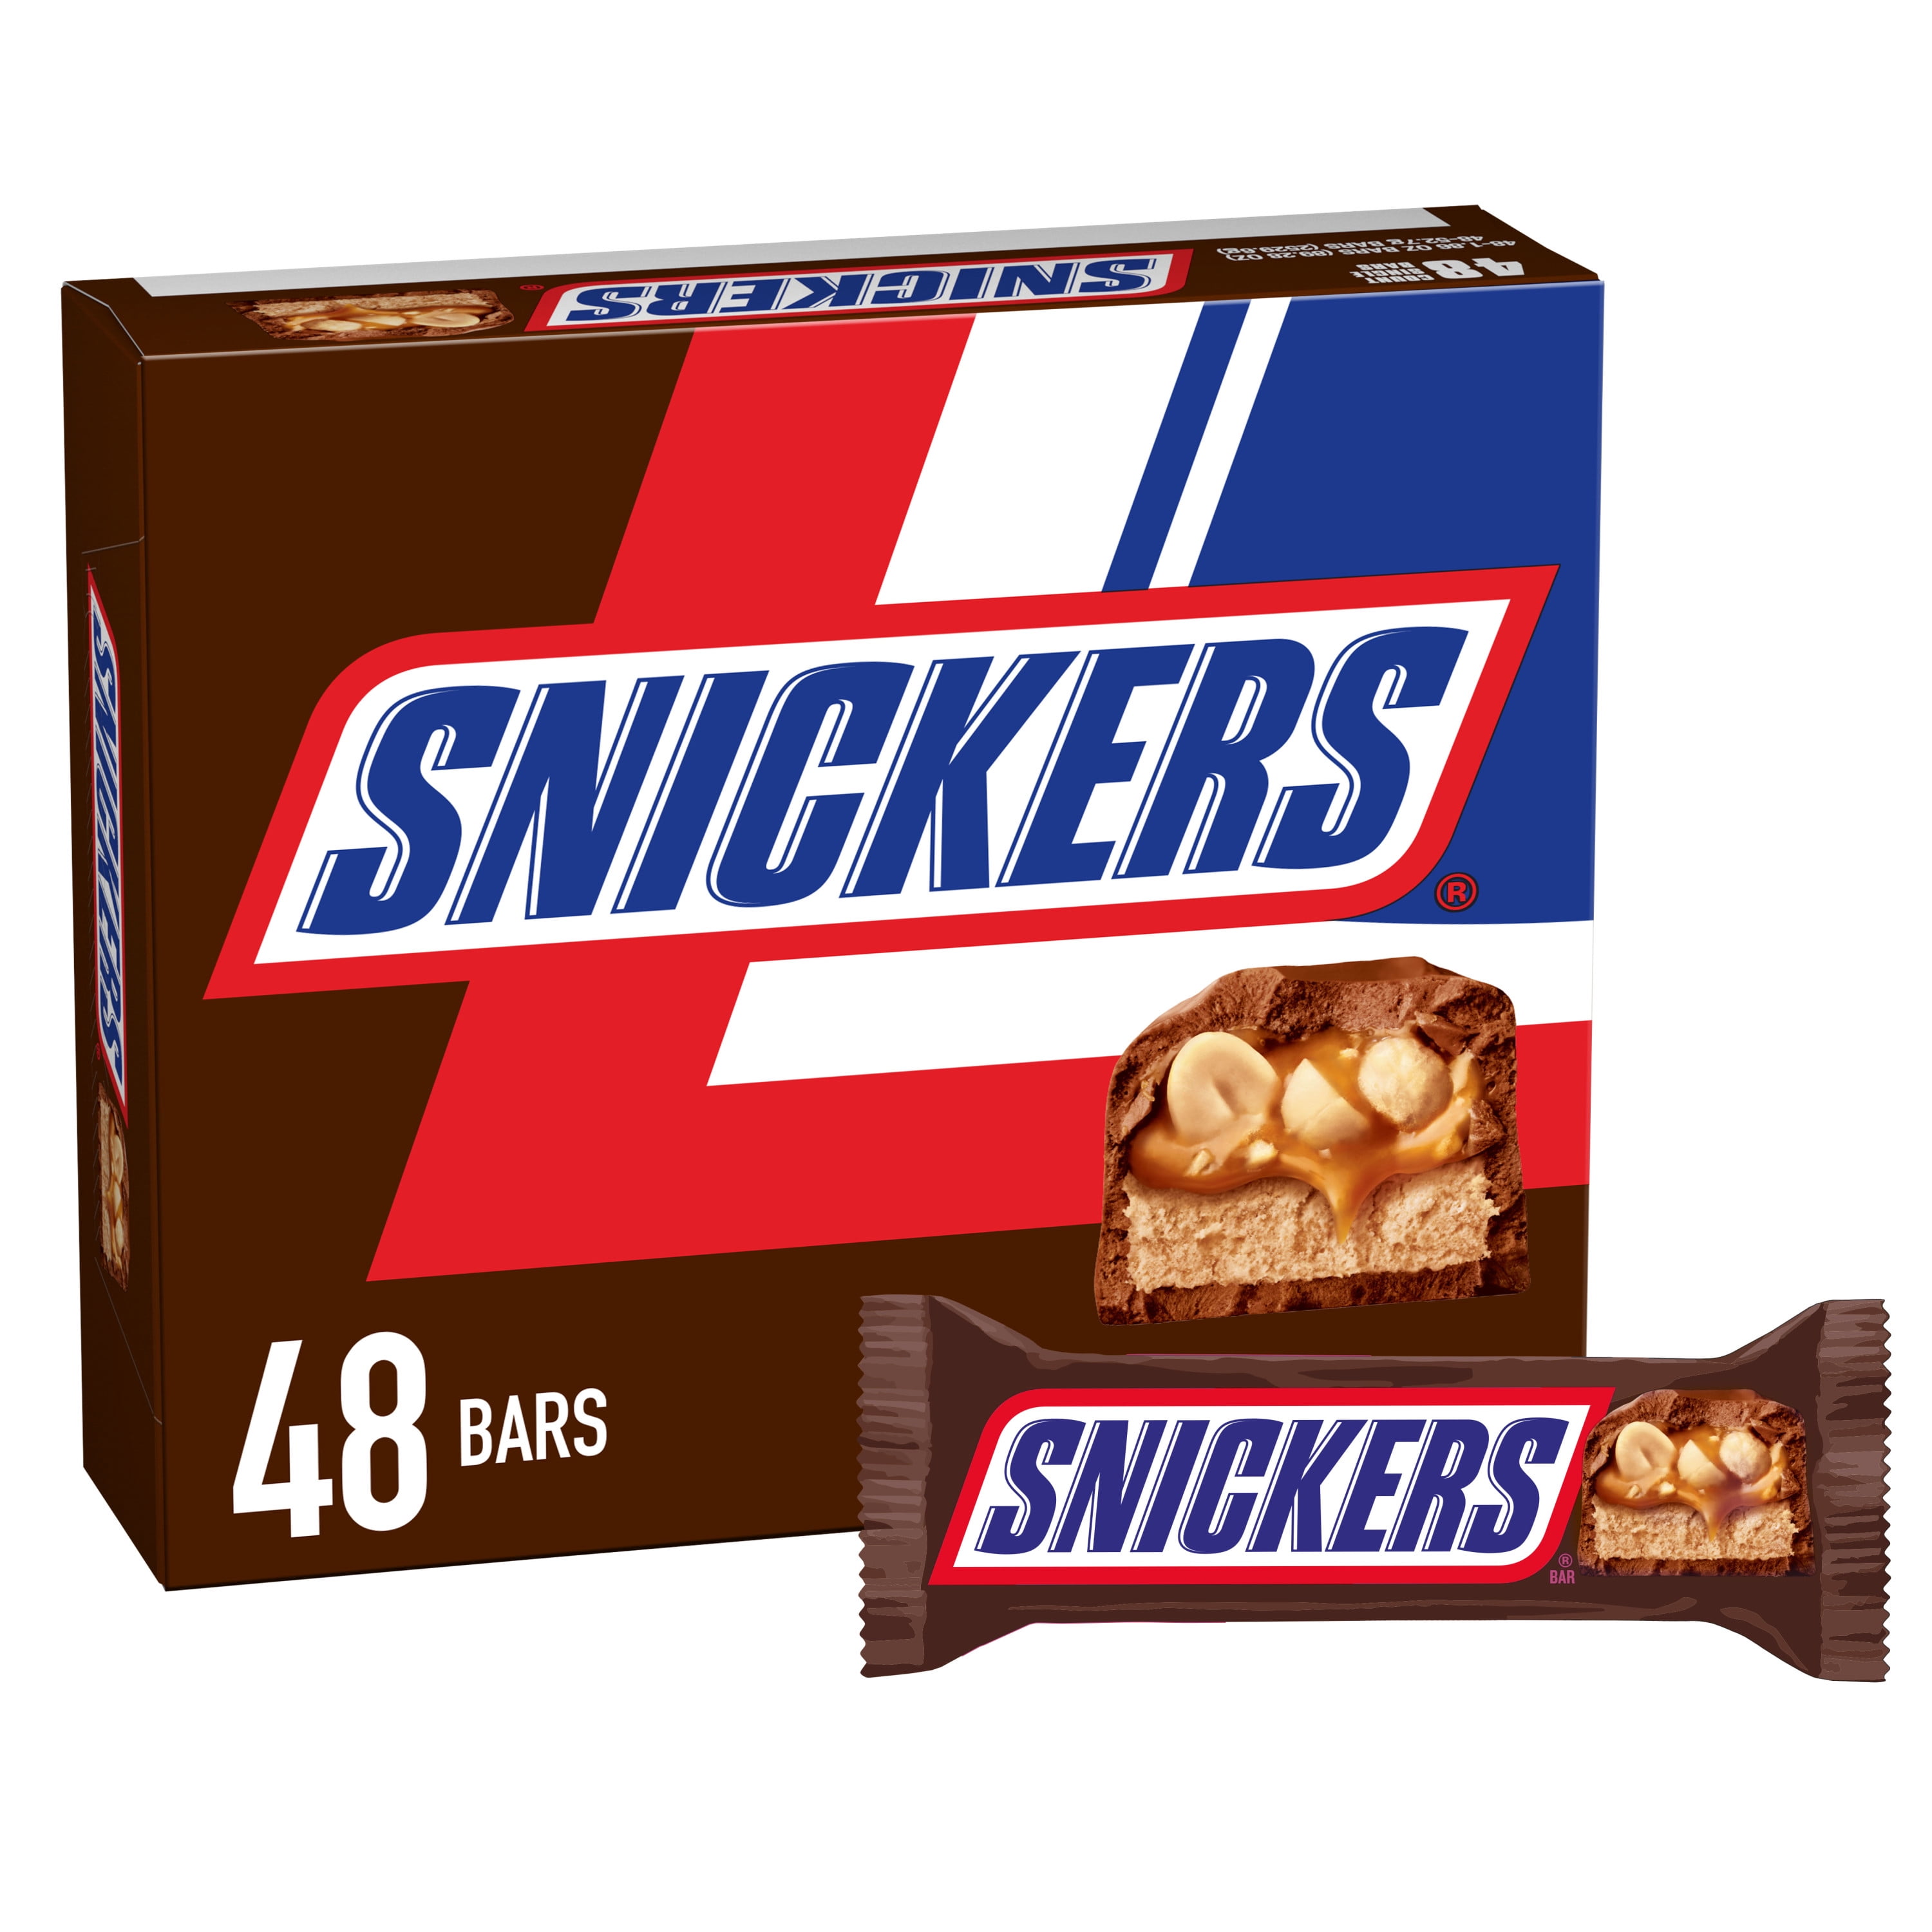 Snickers Mini Red White & Blue Sharing Size